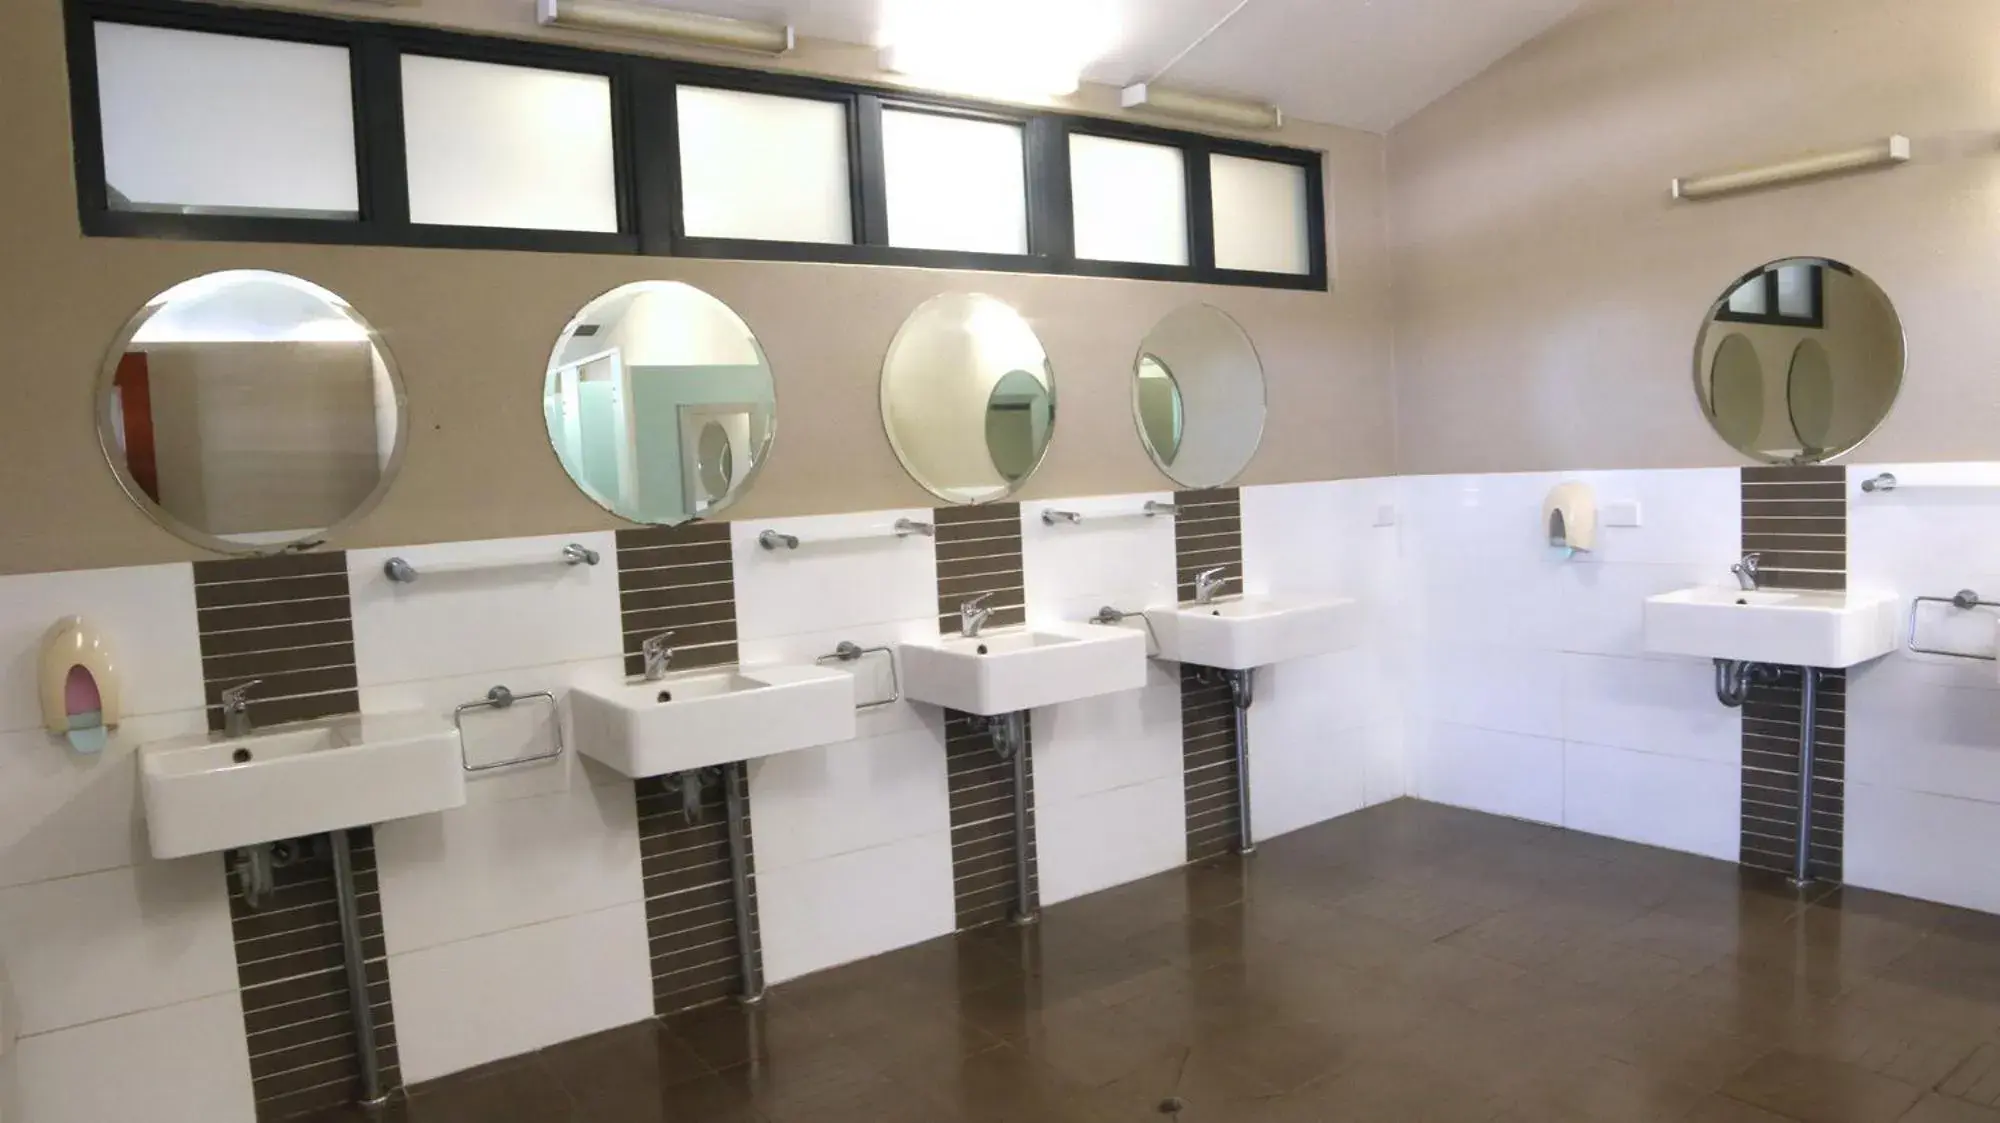 Bathroom in Beaches of Broome